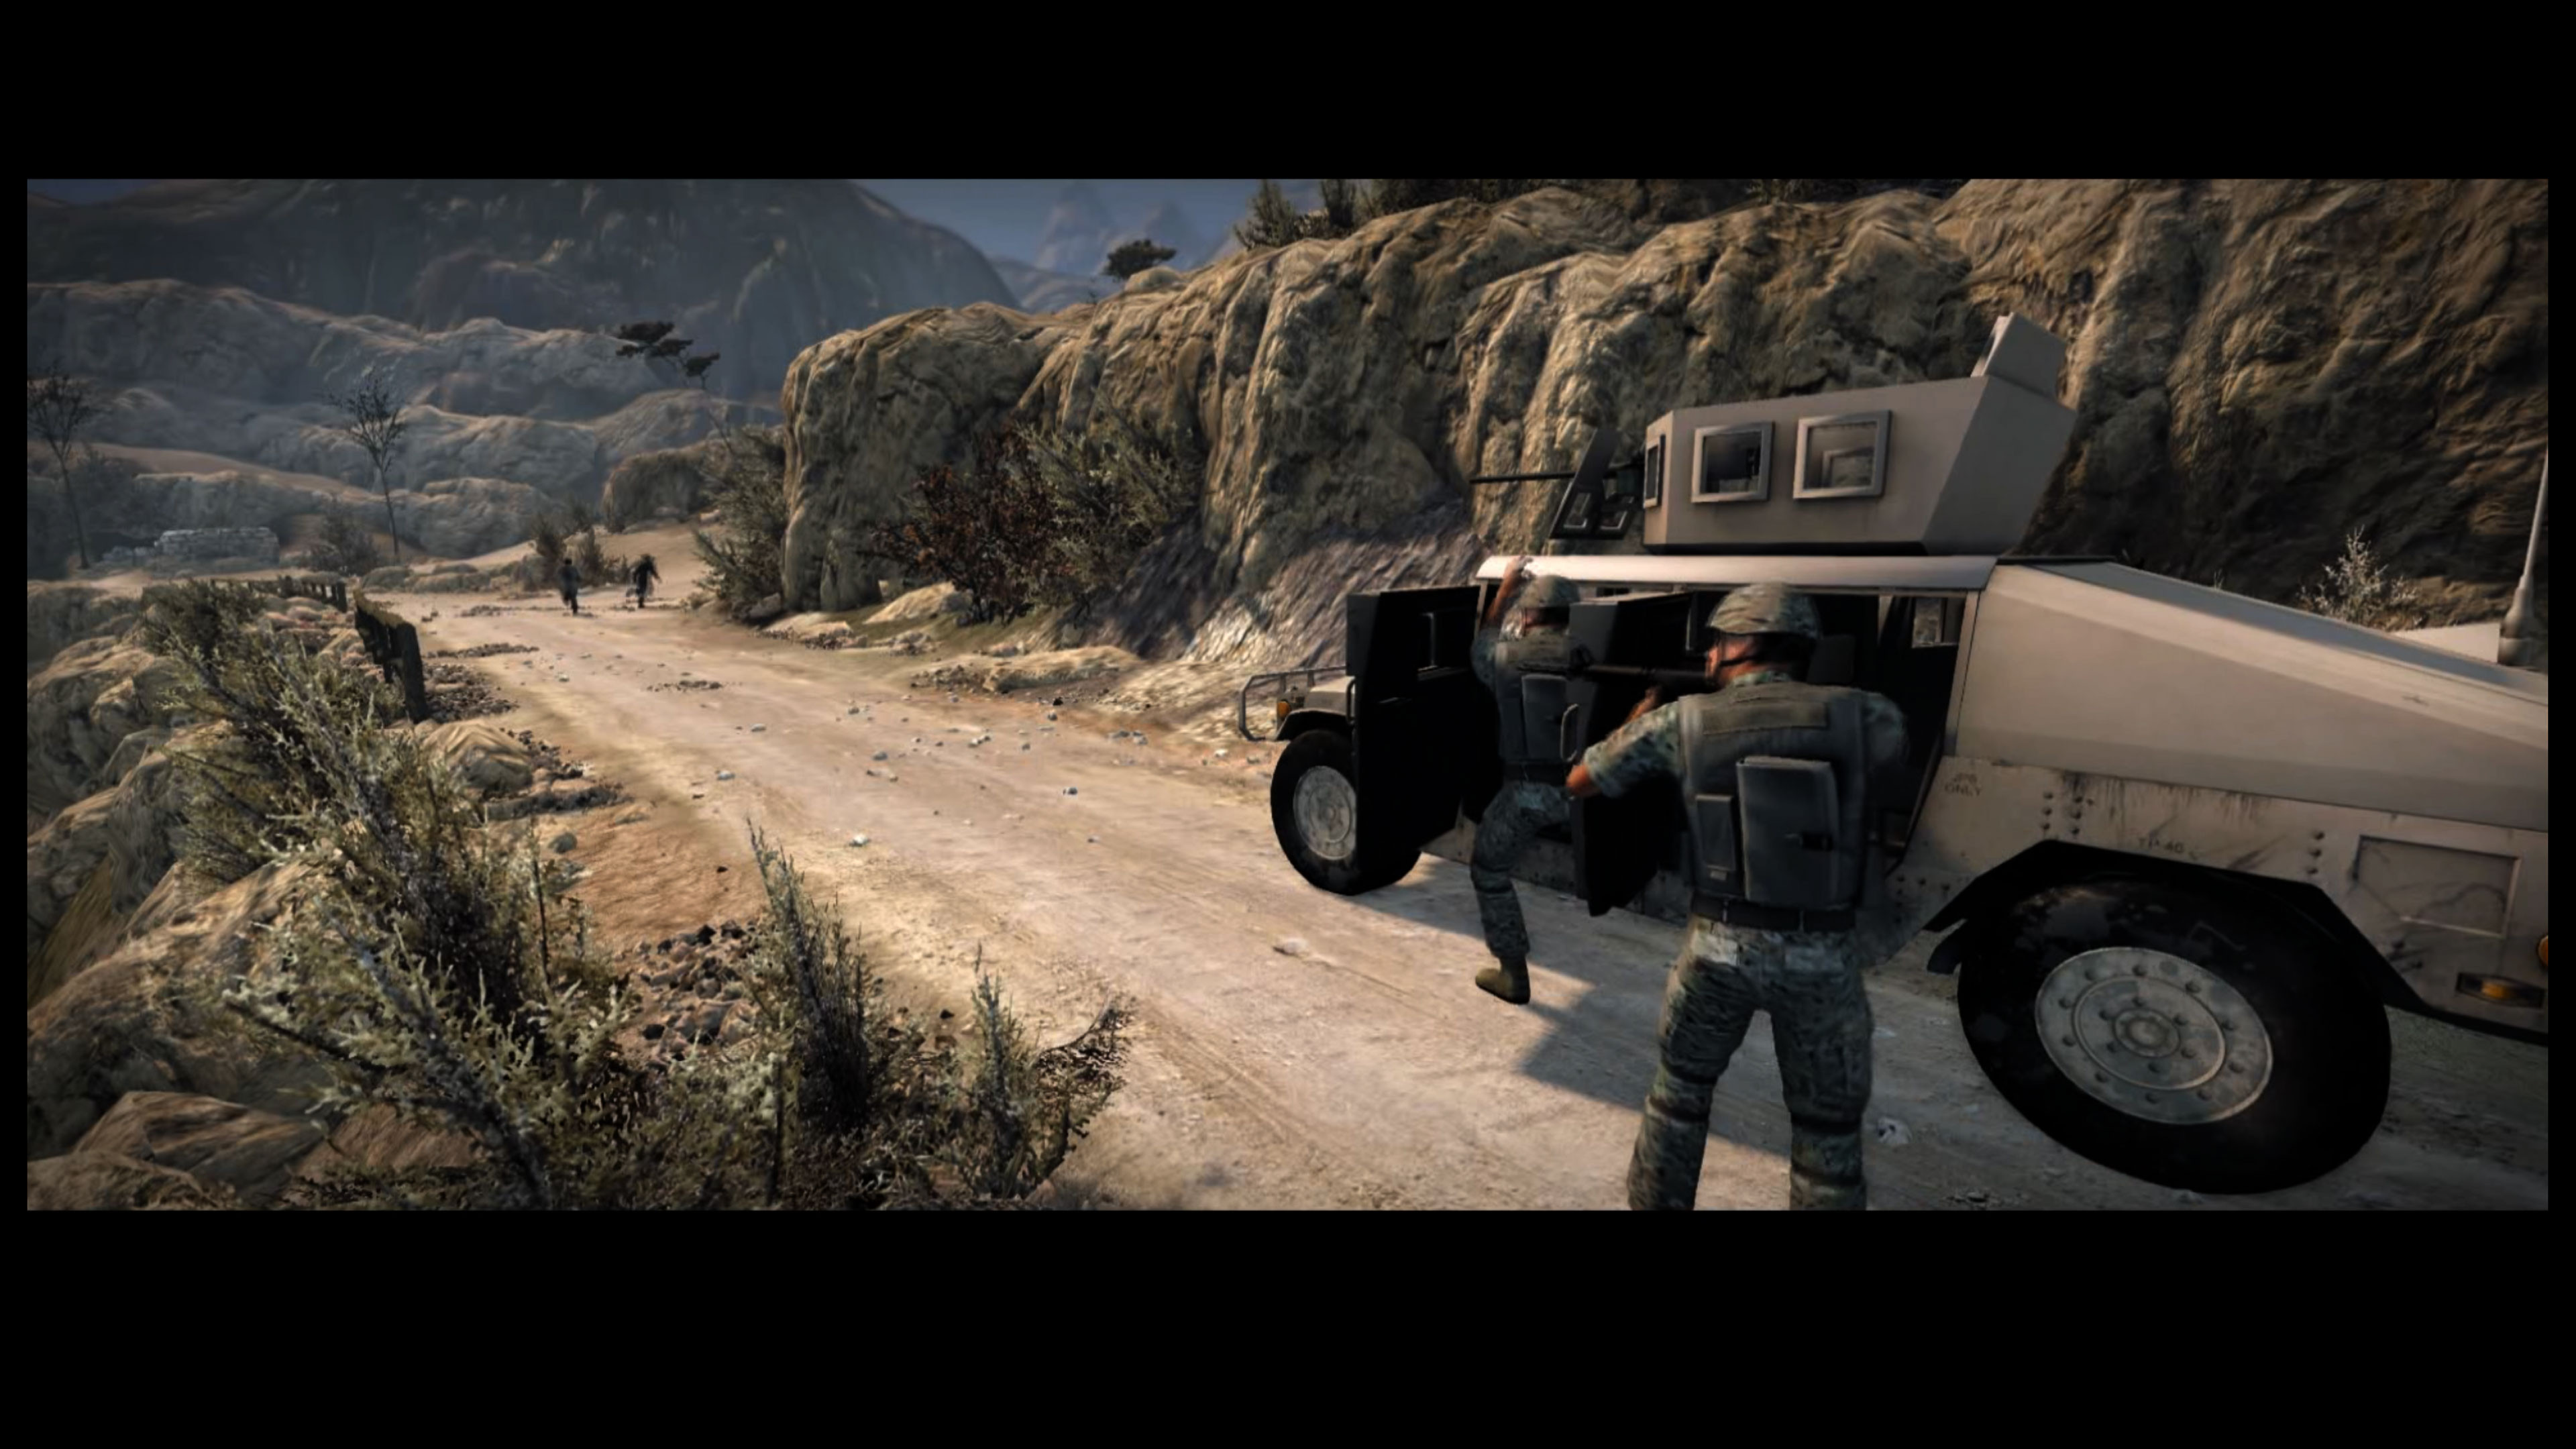 I led a team to create the vehicles, characters and all of the scenario and assets within Cryengine 2015 